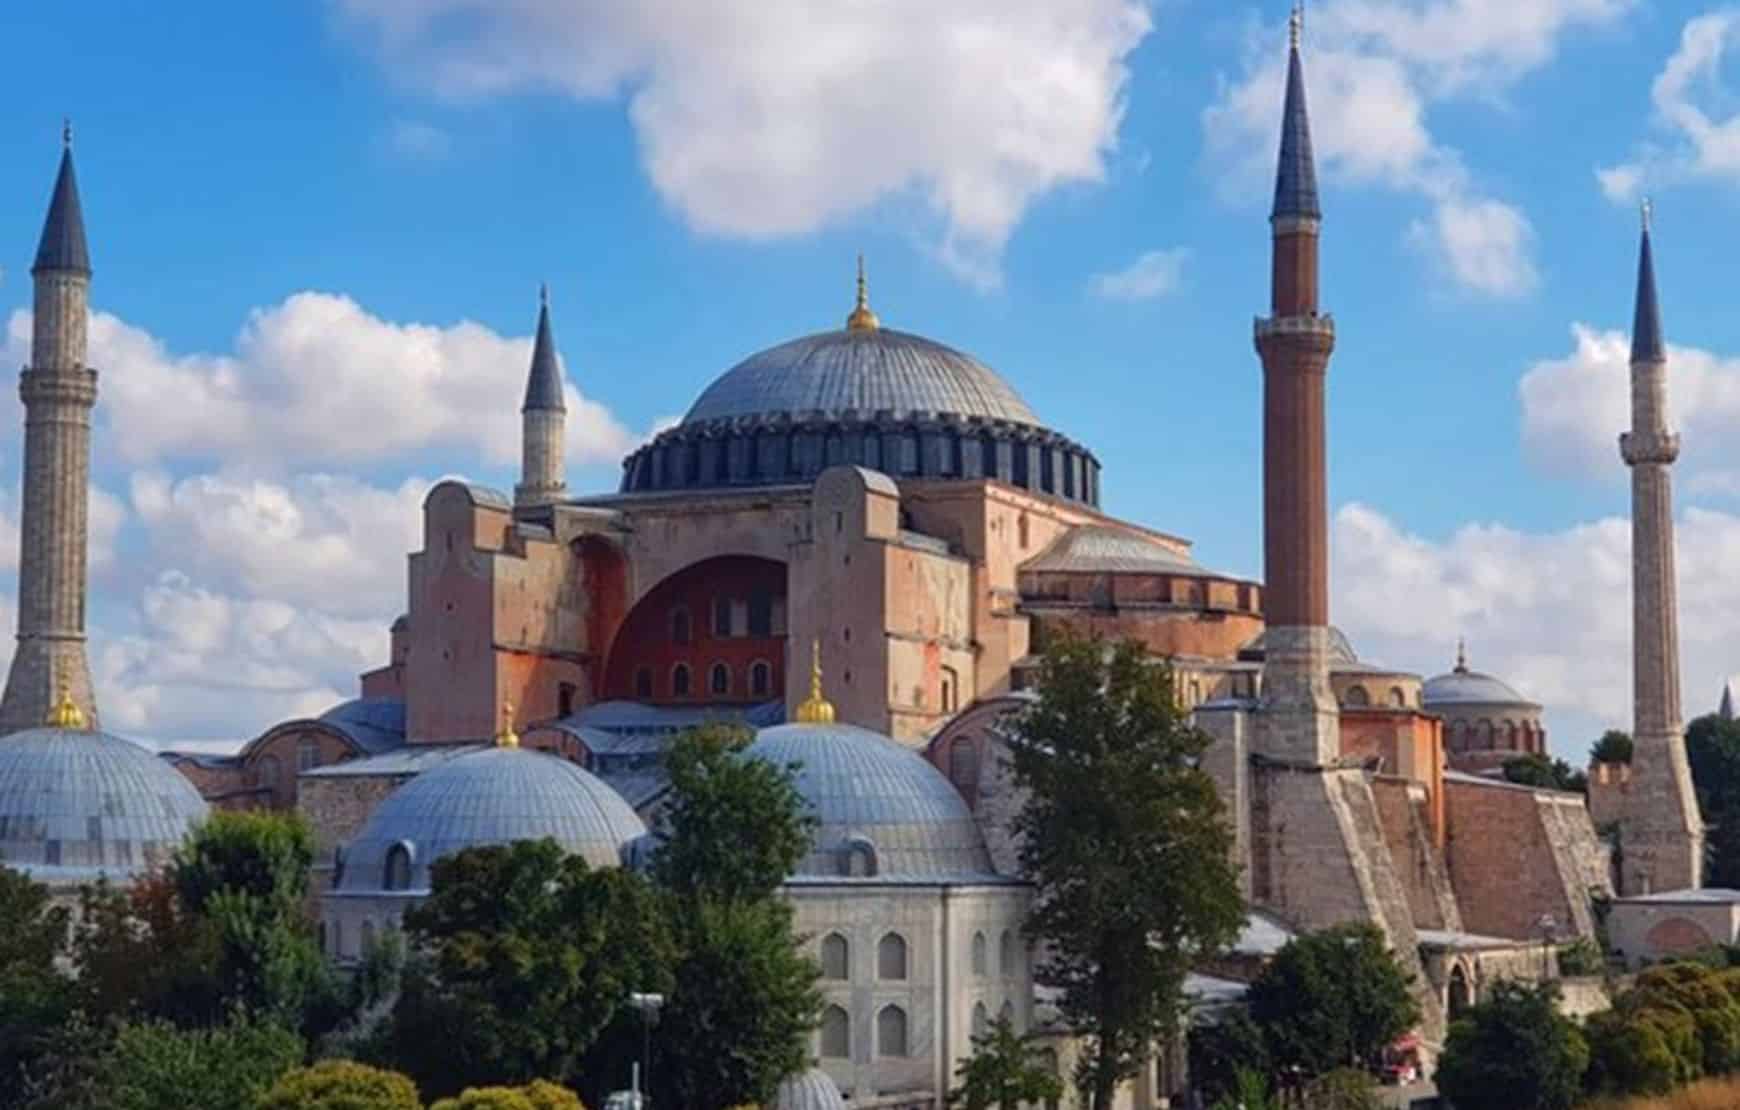 We'll visit Hagia Sophia at our Istanbul guided tour